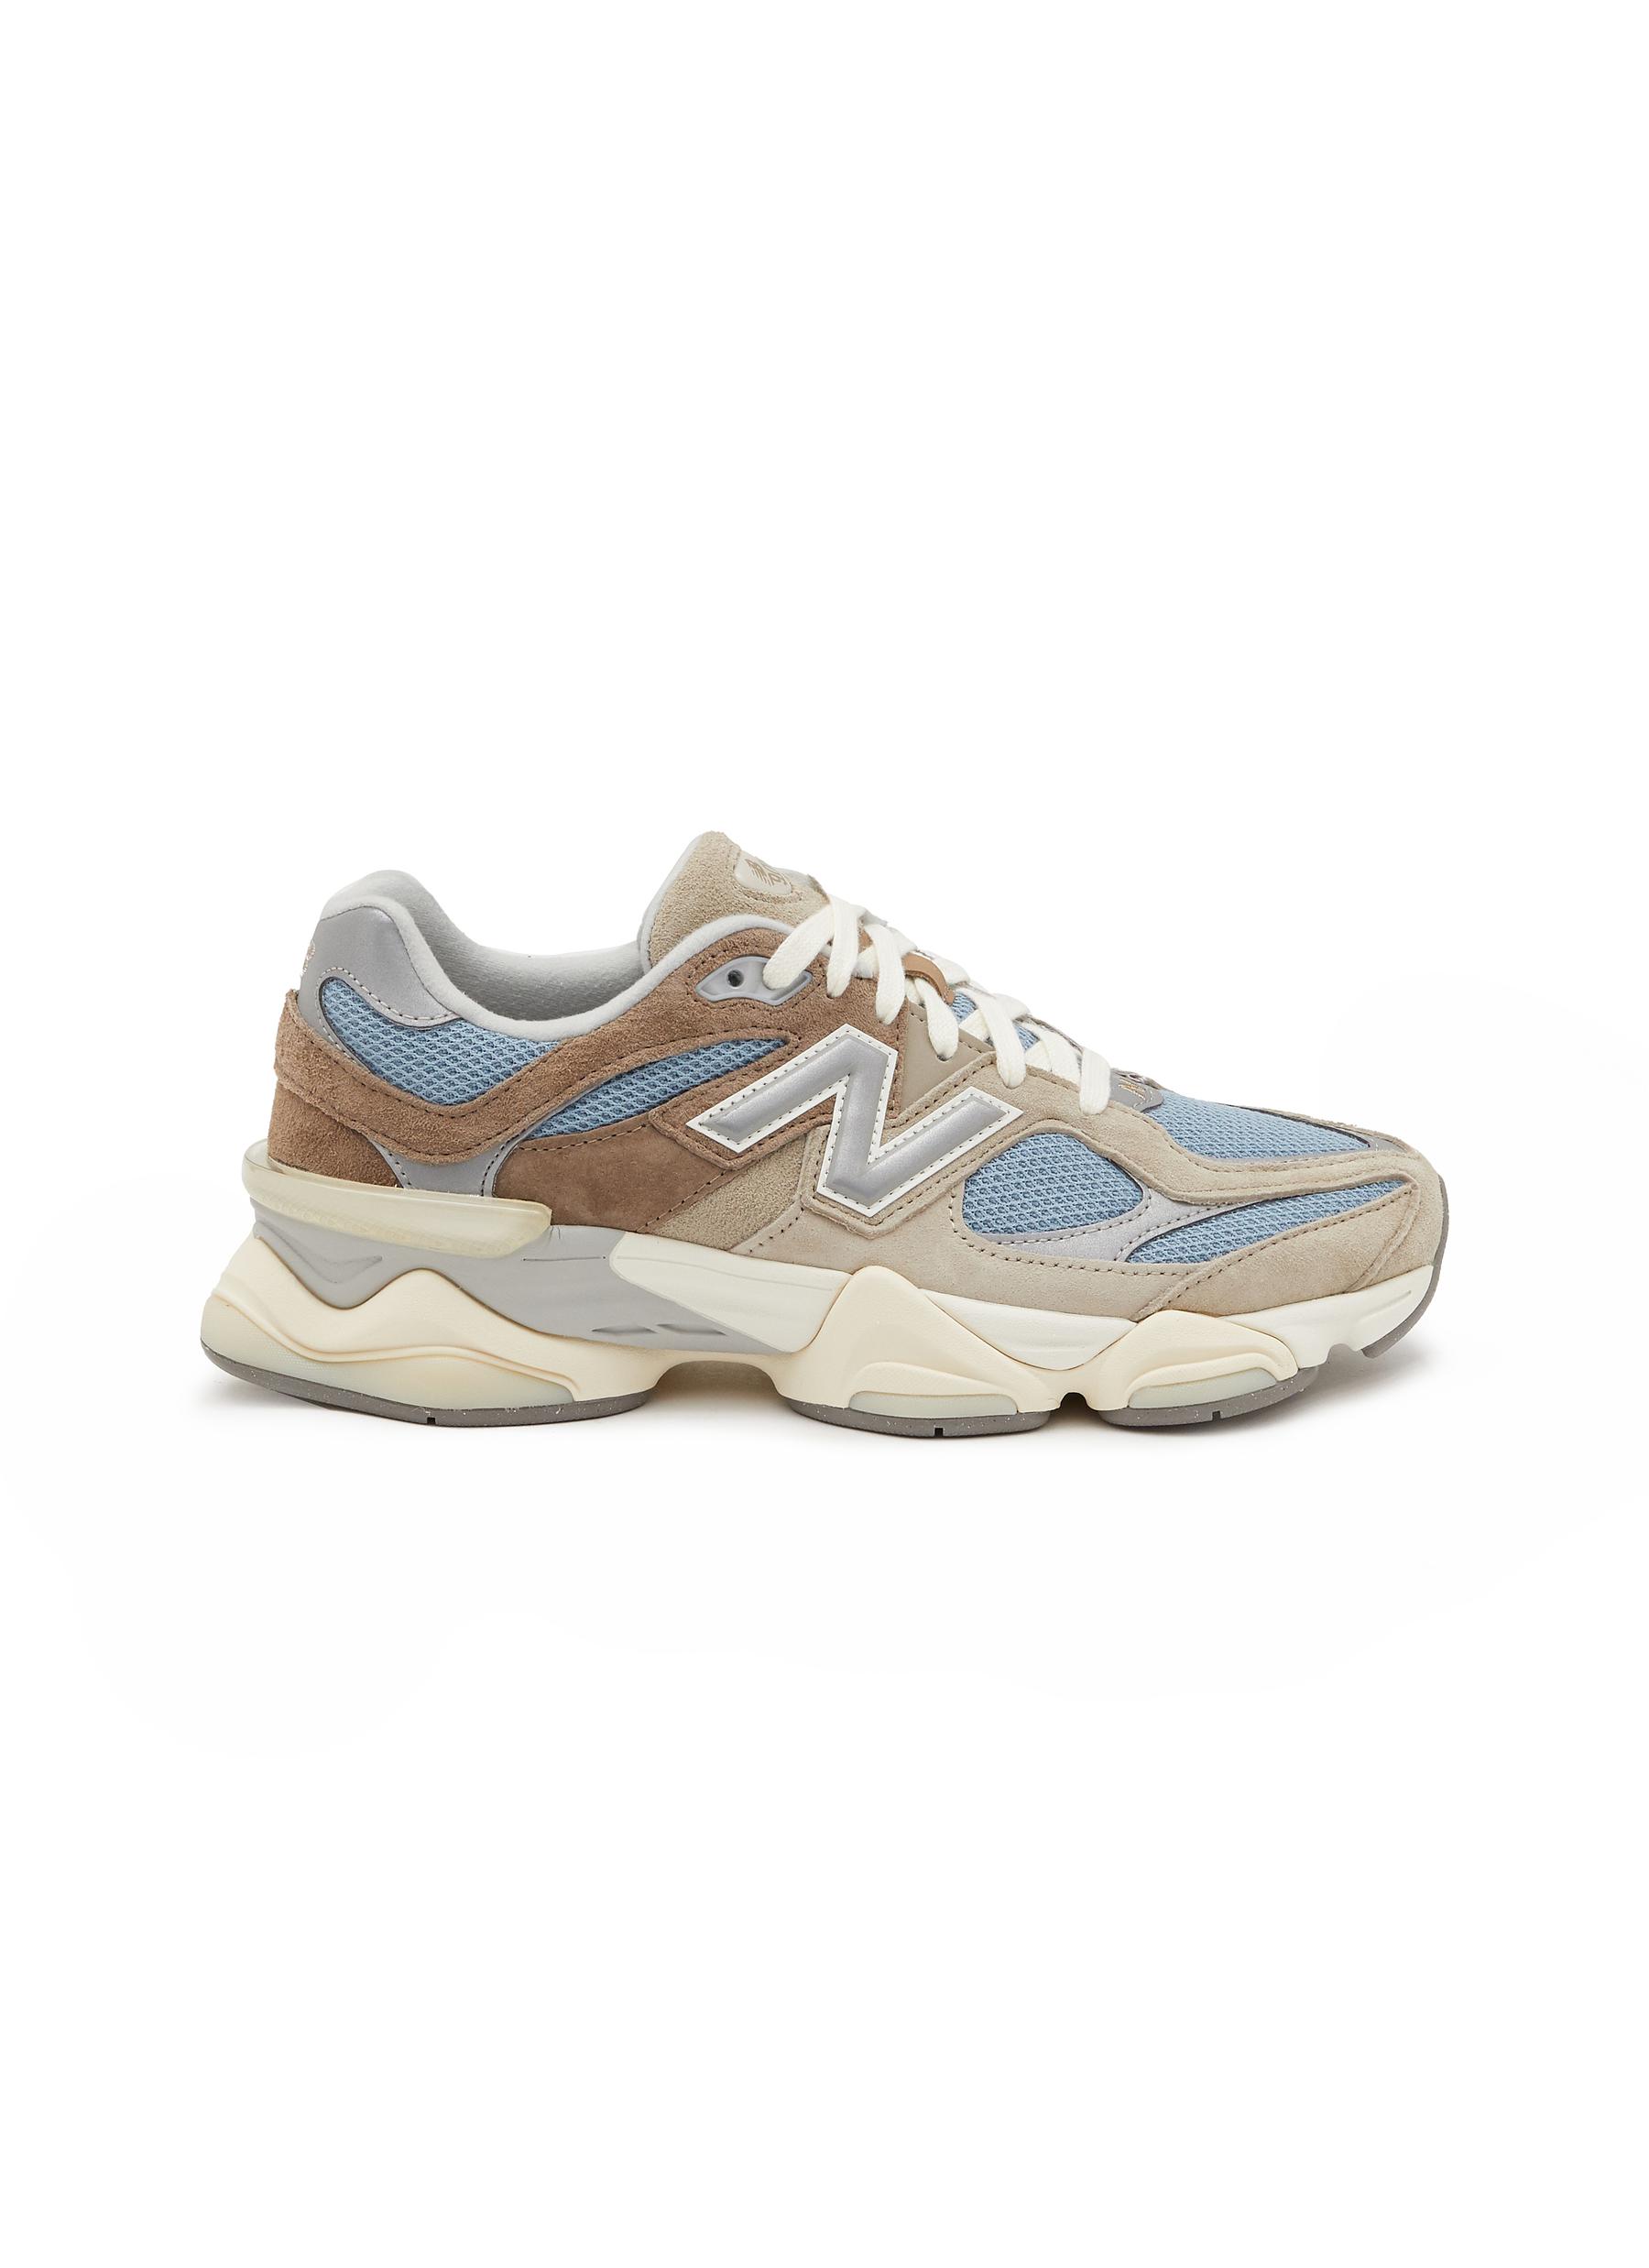 NEW BALANCE 9060 LACE UP SNEAKERS